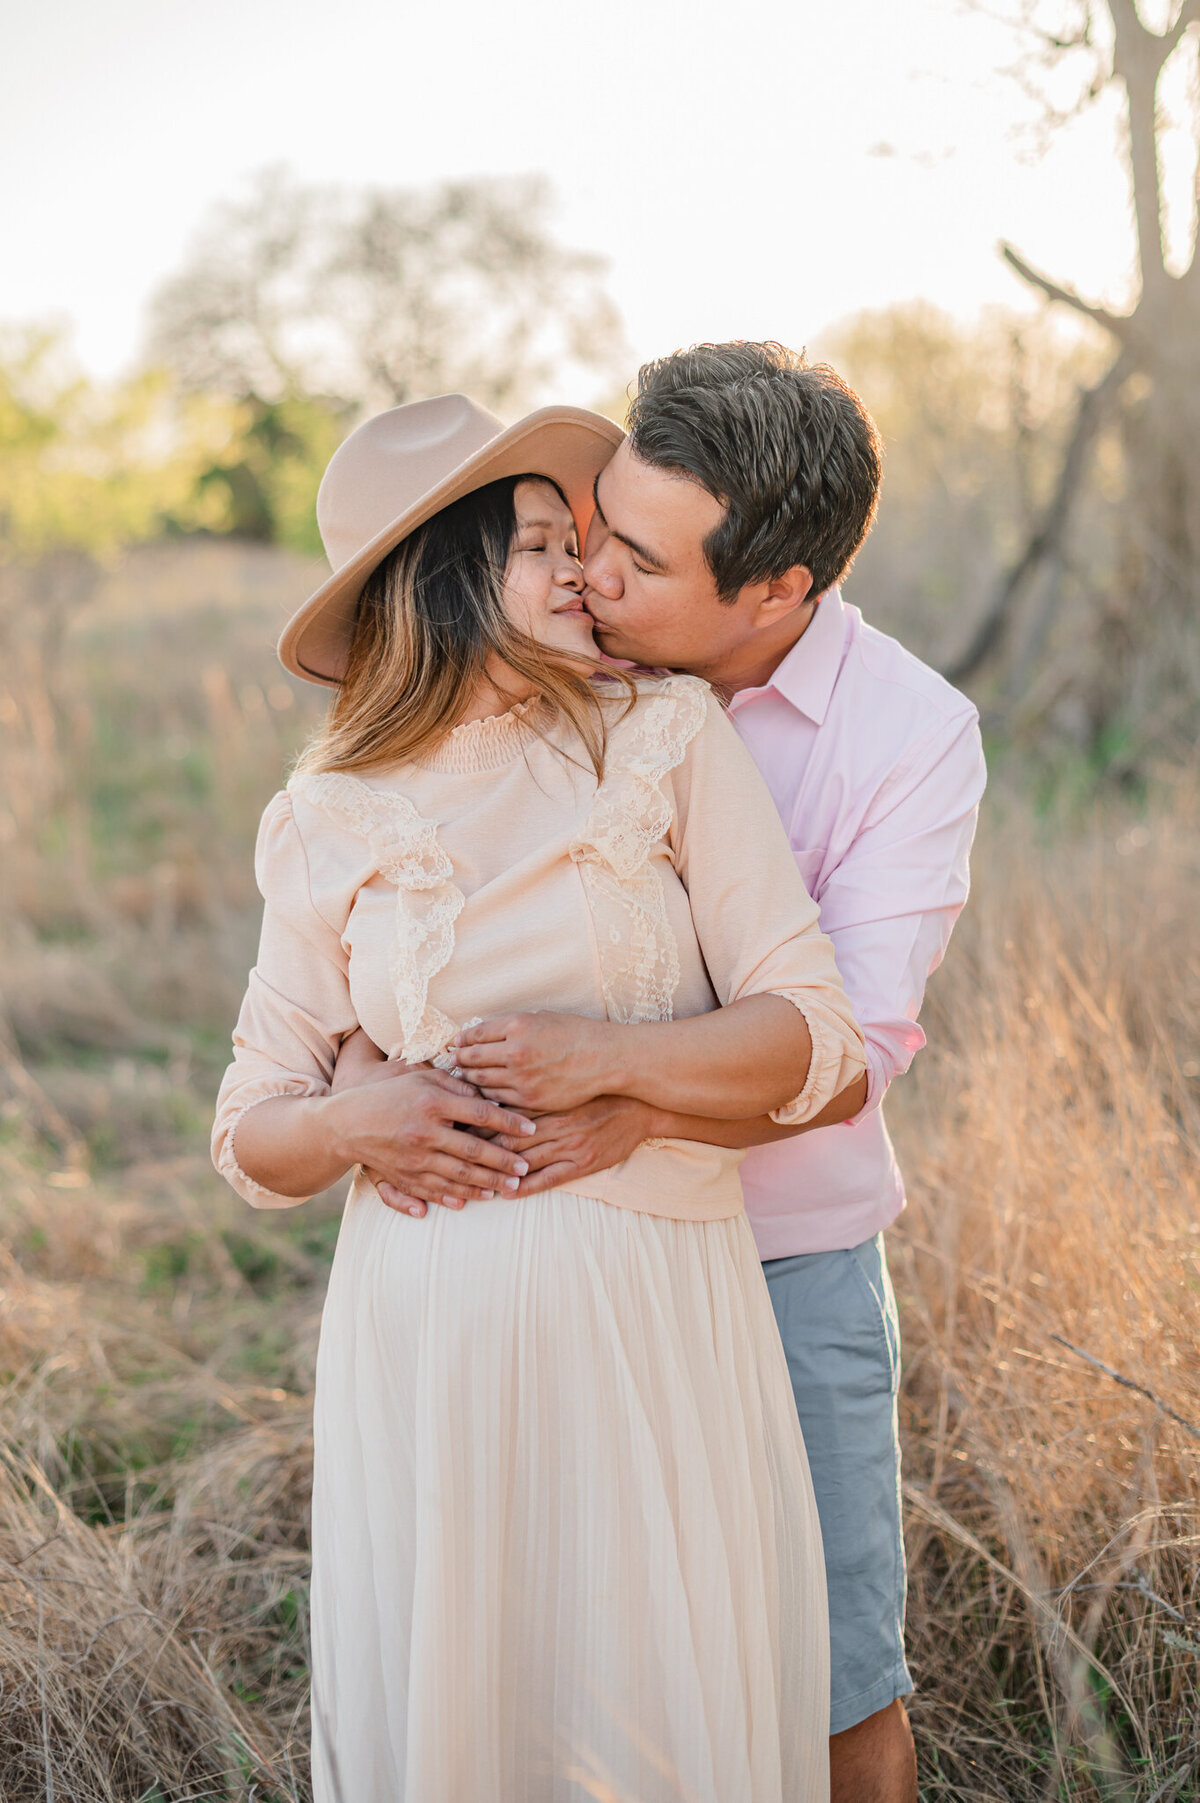 Expectant couple embraces during maternity pictures in San Antonio.